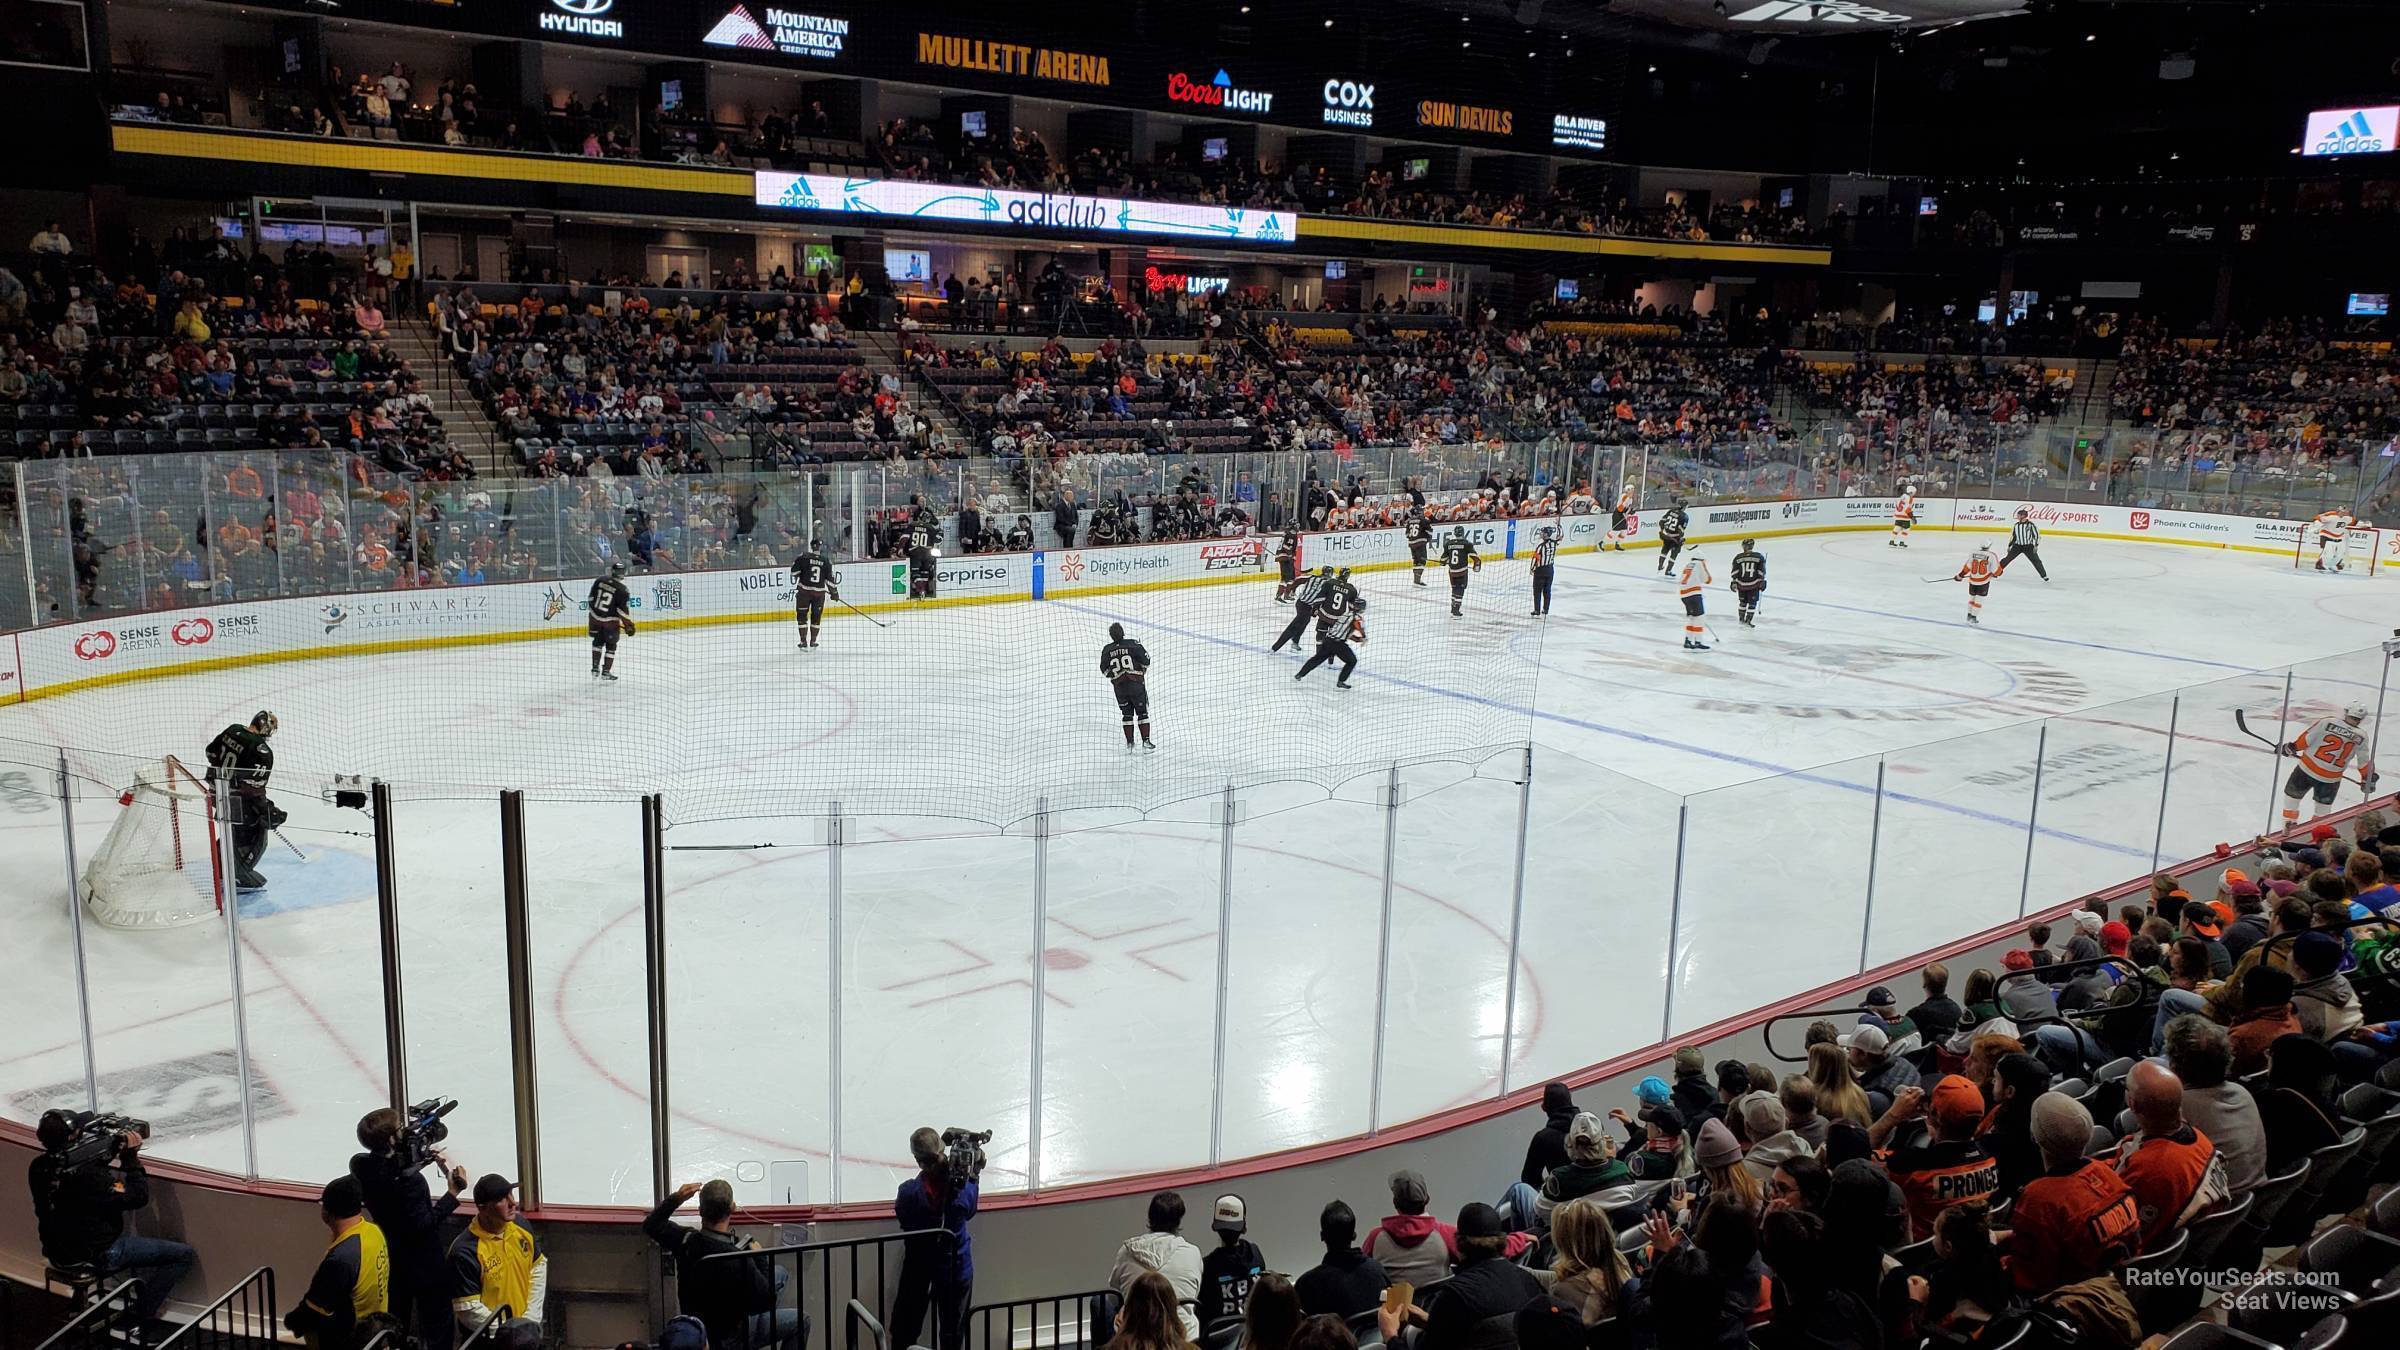 section 114, row wc seat view  - mullett arena